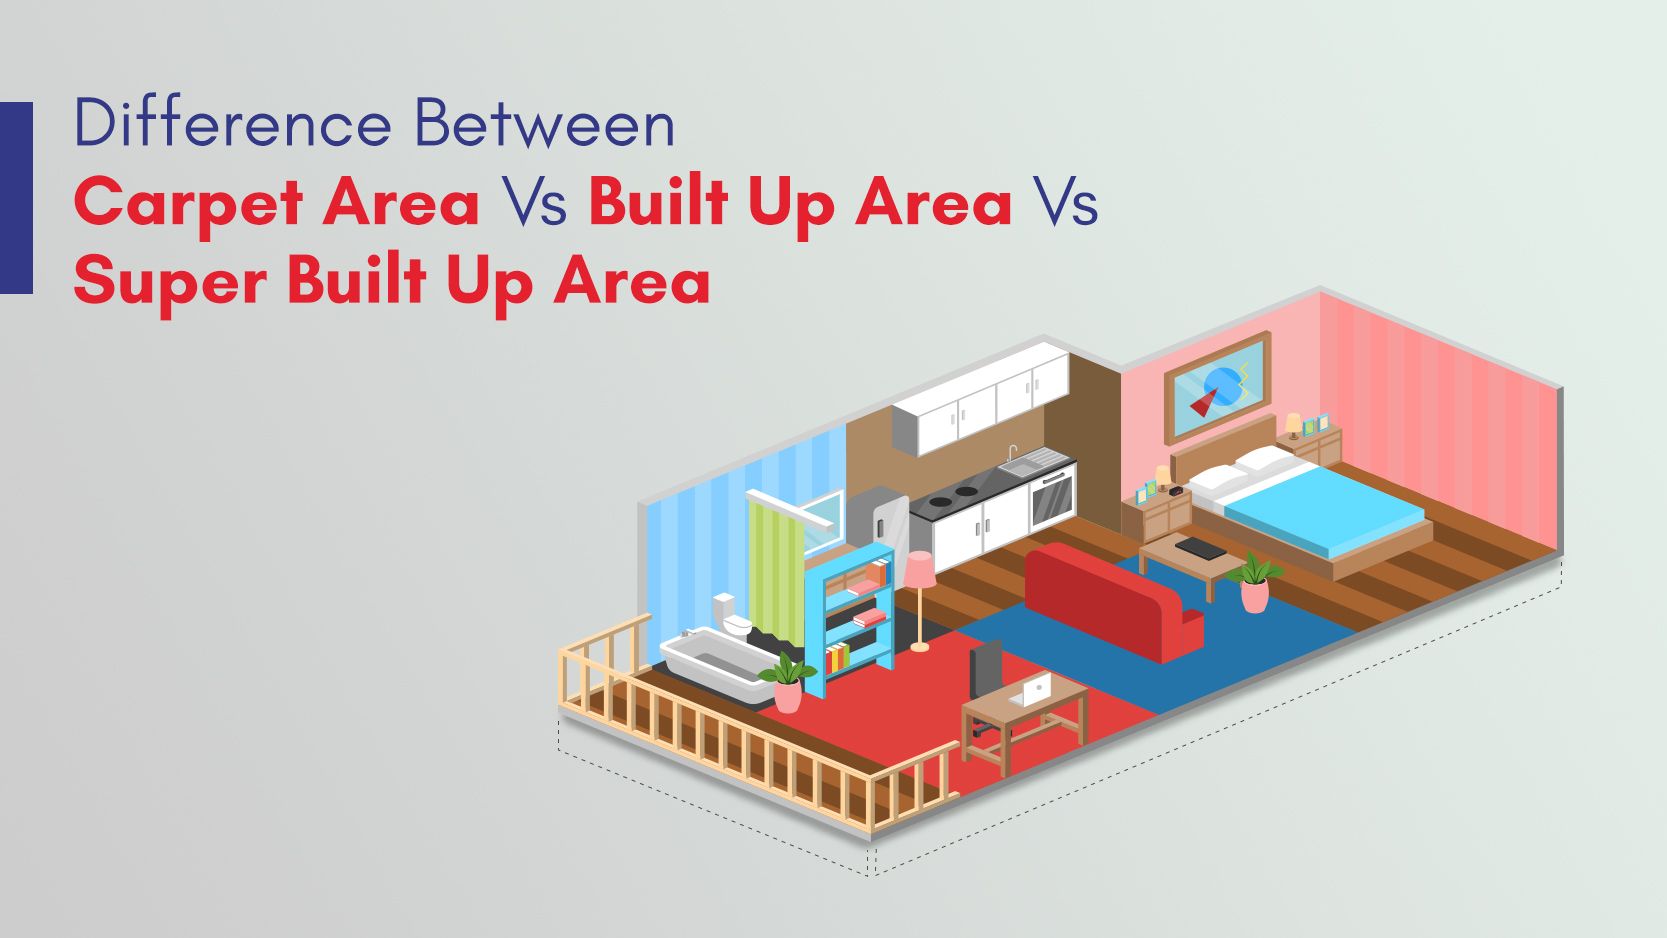 Difference Between Carpet Area vs Built Up Area vs Super Built Up Area